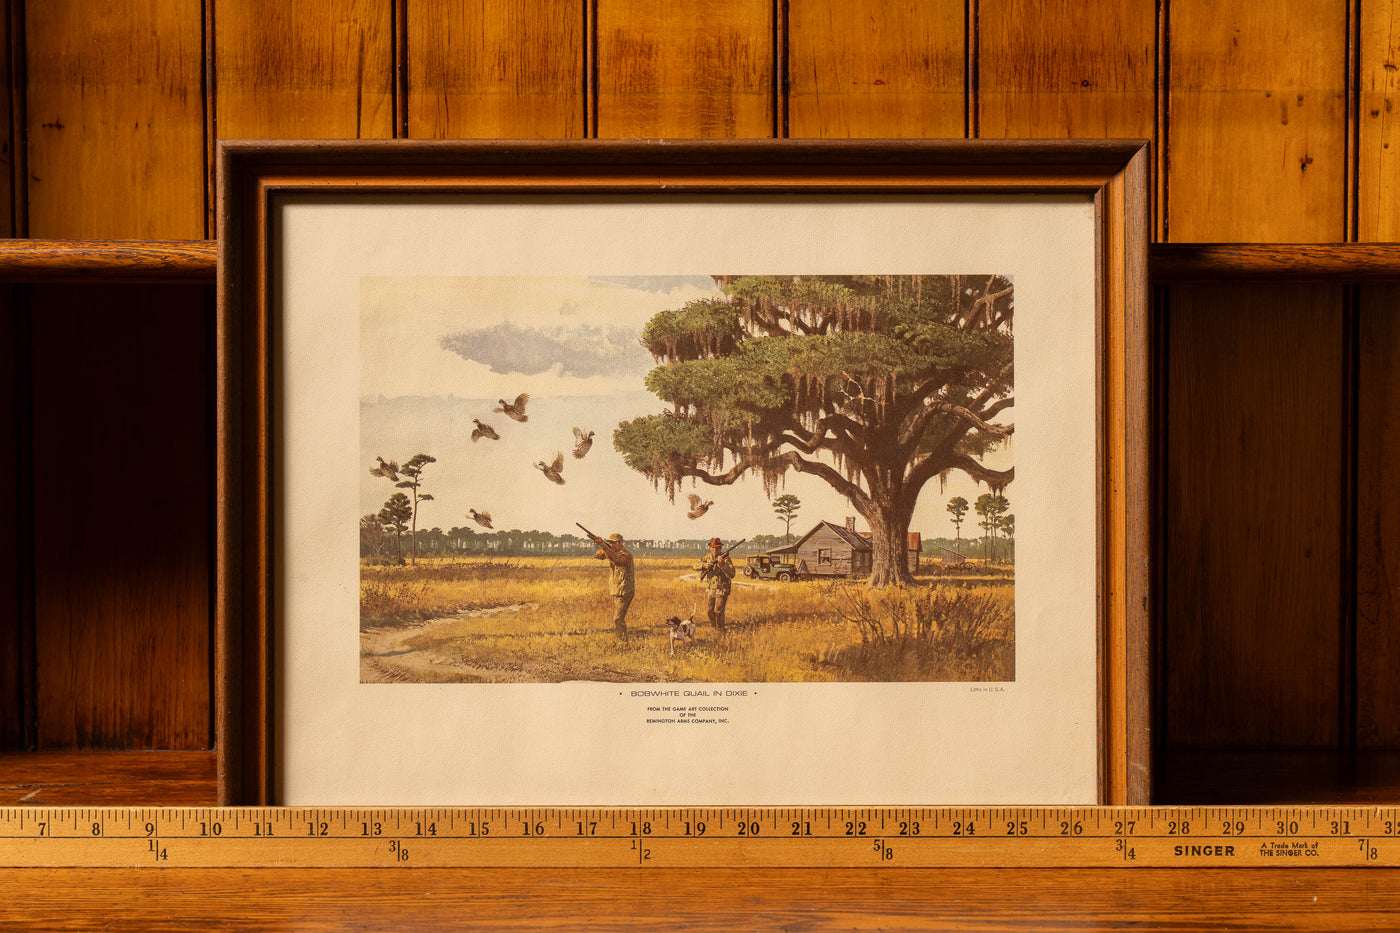 Remington Arms "Bobwhite Quail in Dixie" Game Art Collection Framed Litho